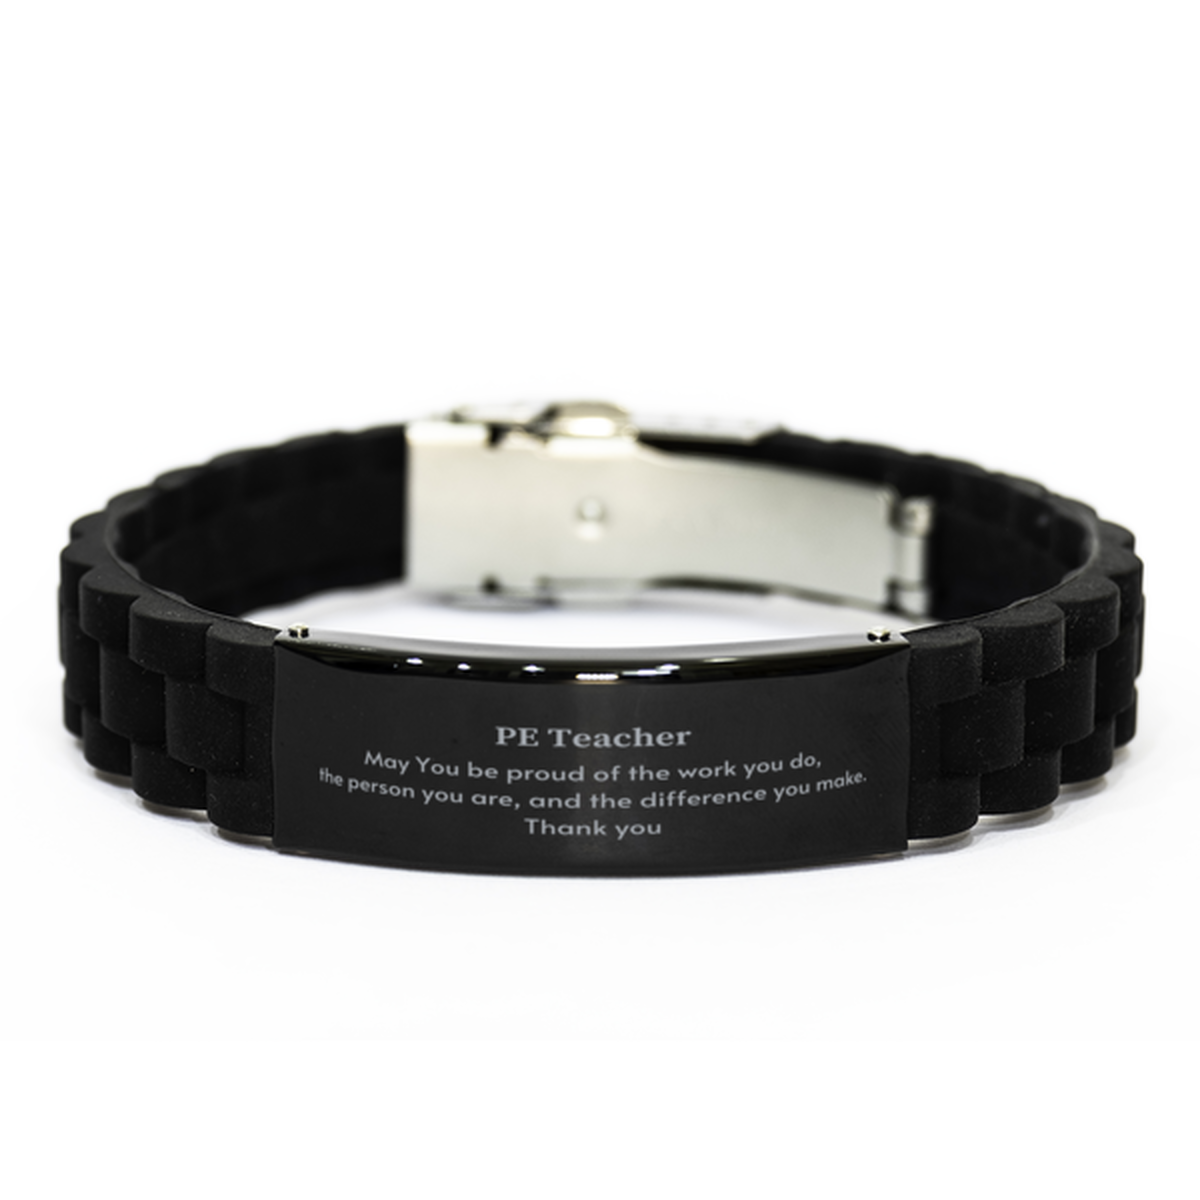 Heartwarming Black Glidelock Clasp Bracelet Retirement Coworkers Gifts for PE Teacher, PE Teacher May You be proud of the work you do, the person you are Gifts for Boss Men Women Friends